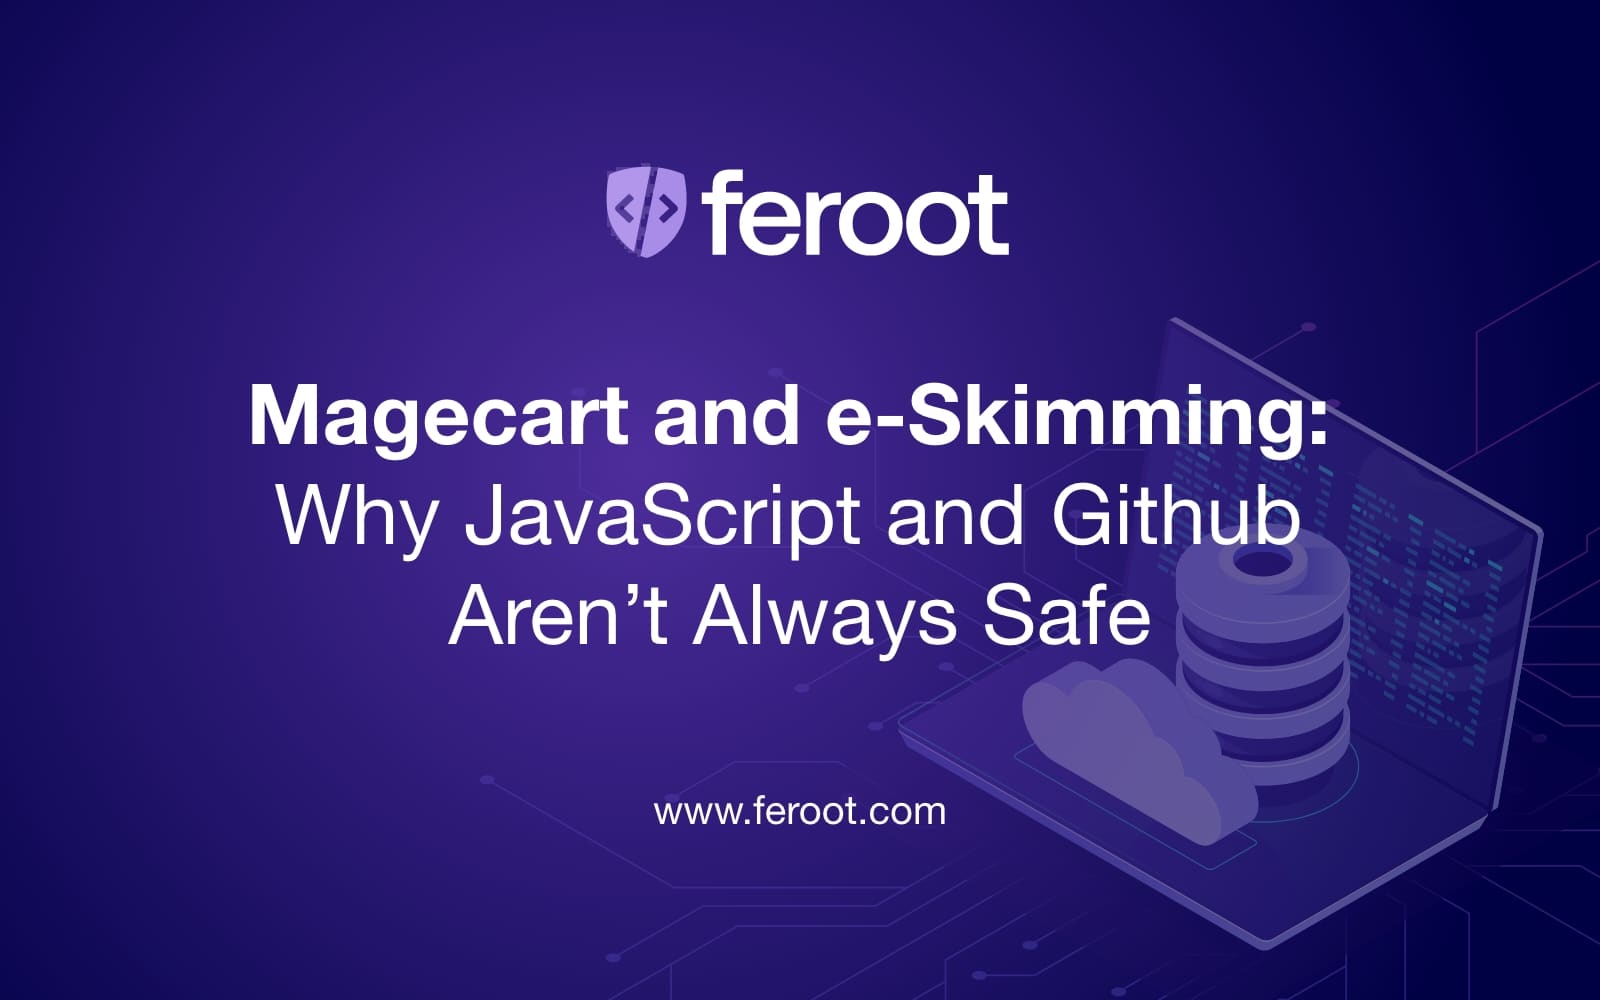 Why JavaScript and Github Aren’t Always Safe